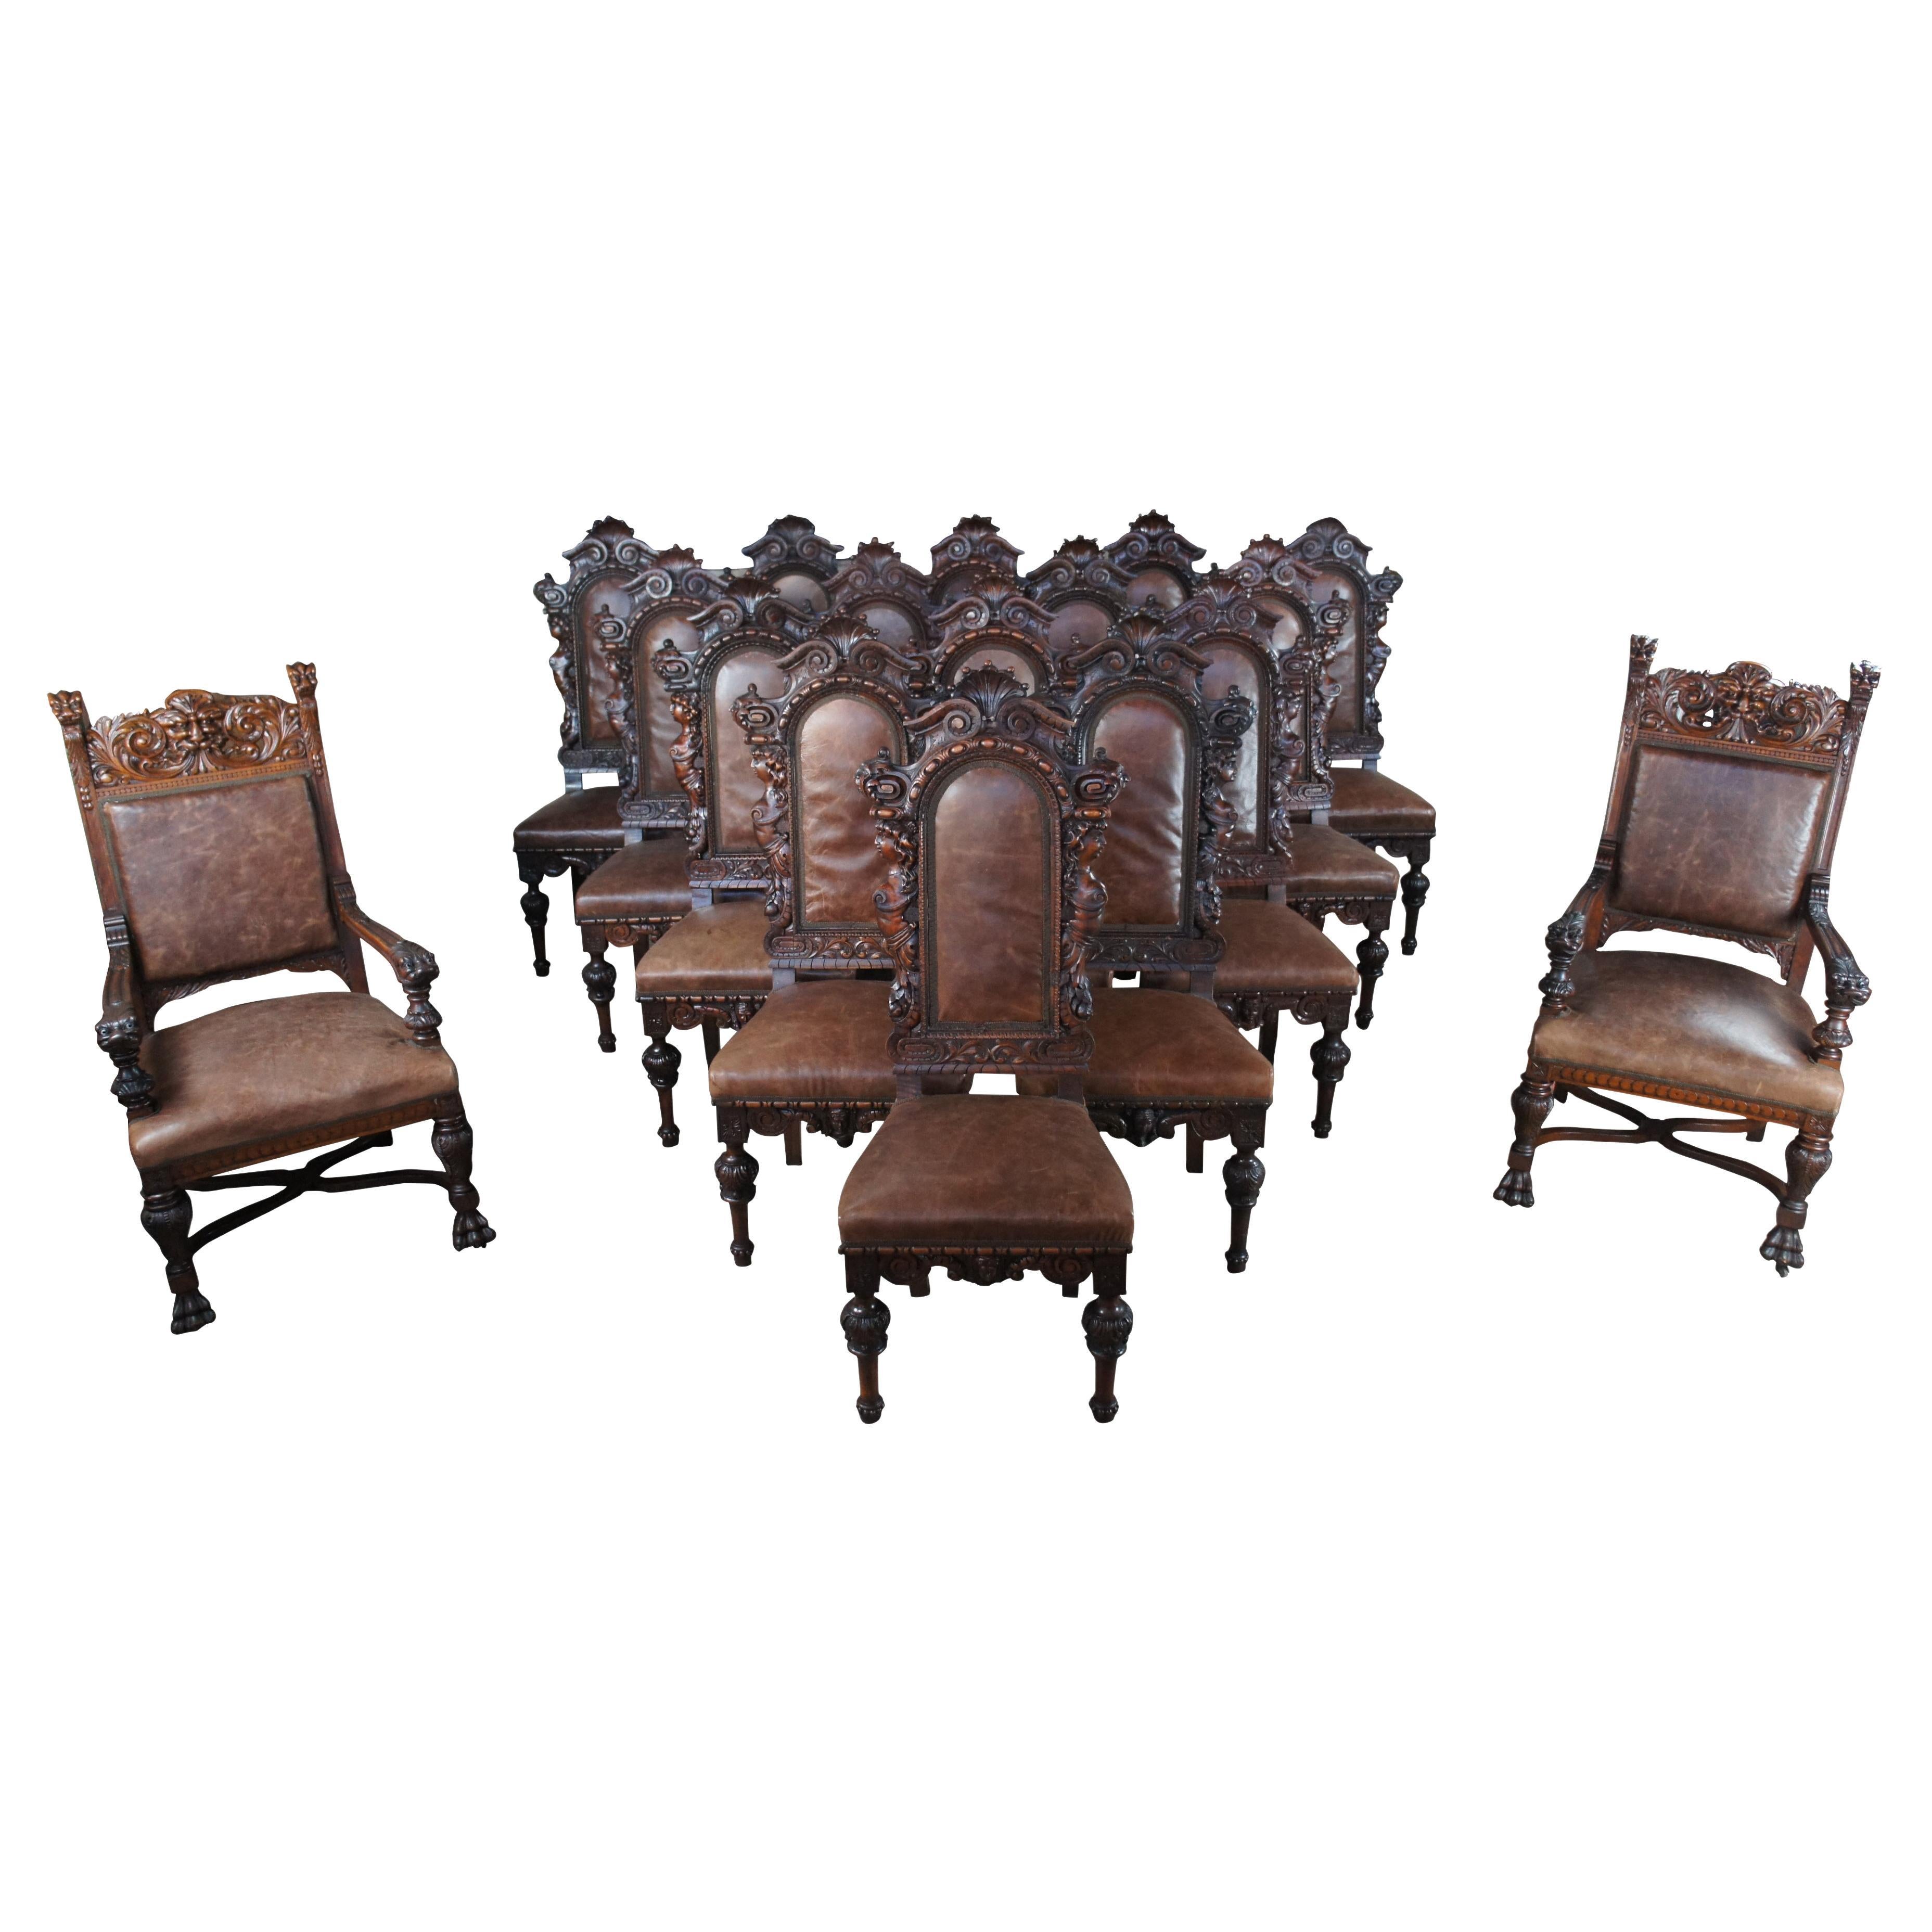 18 Monumental Antique Italian Renaissance Figural Mahogany Leather Dining Chairs